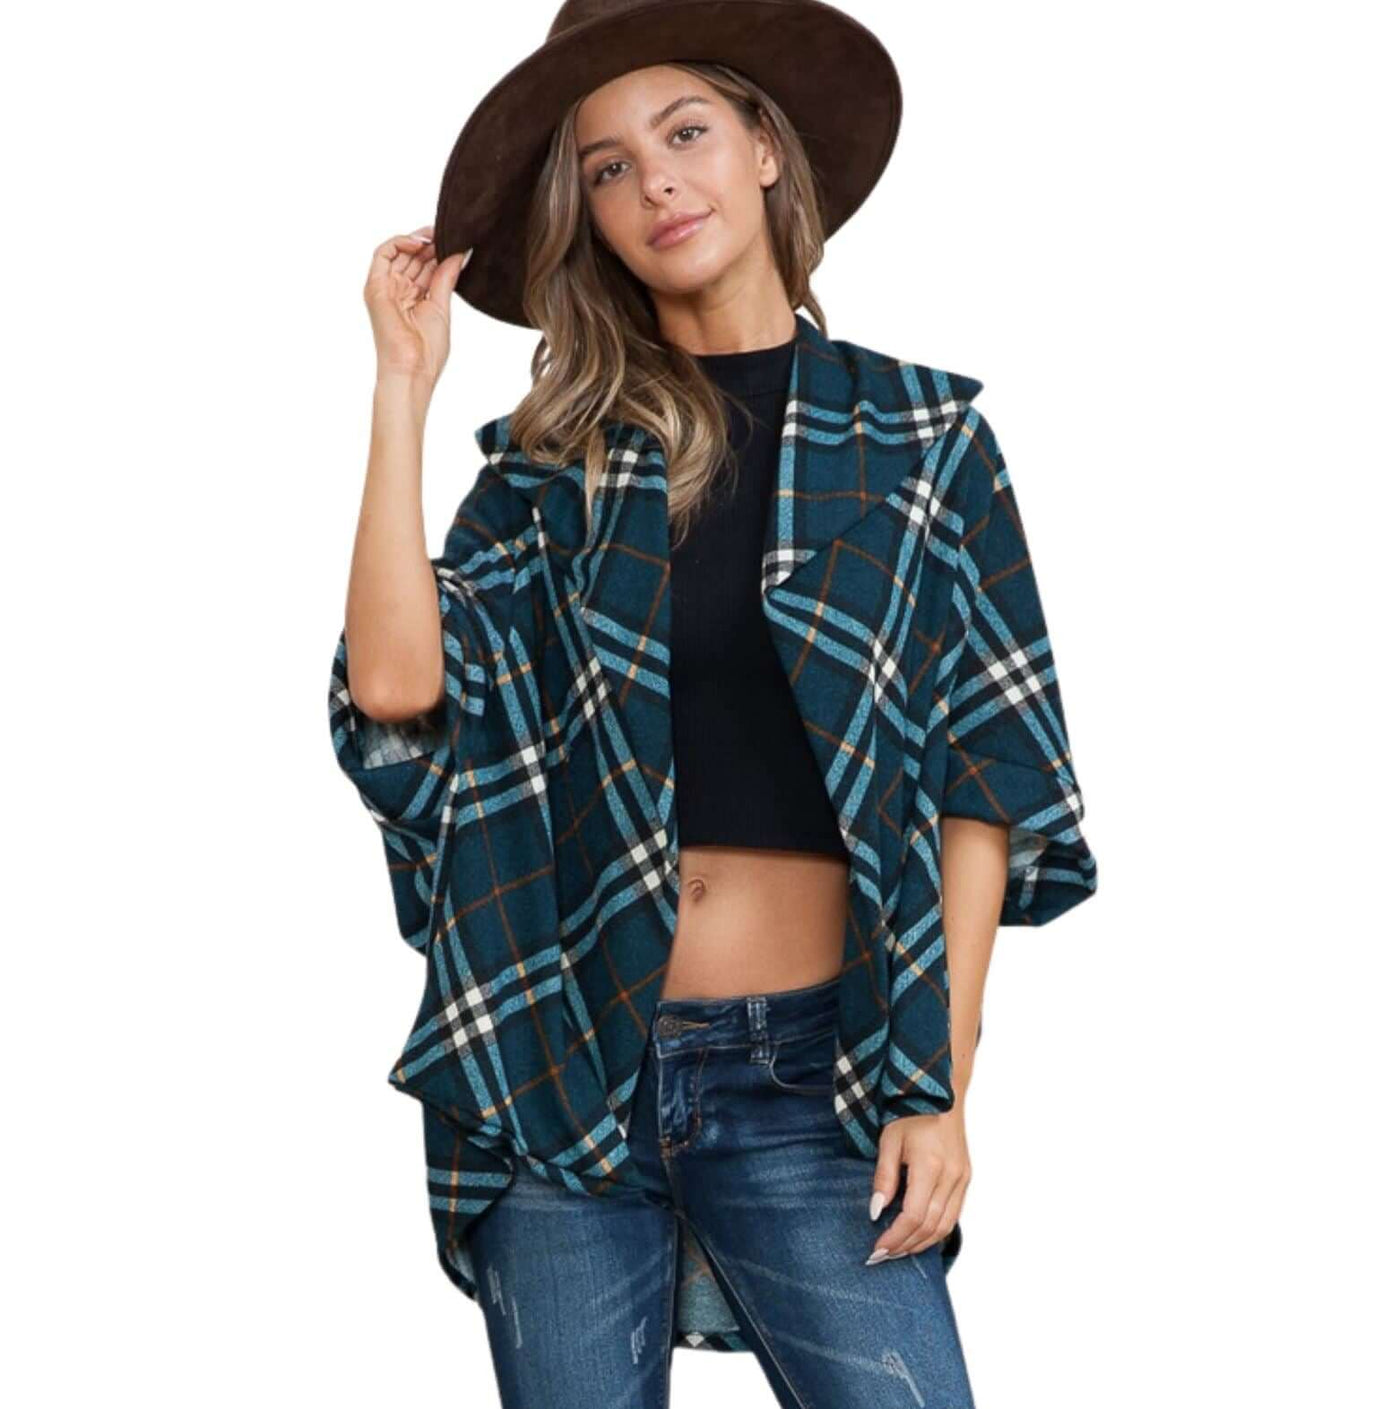 Ladies Plaid Design High Low Dolman Sleeve Cardigan Shawl Top in Dark Teal & Light Teal | Style OFT1378 Orange Farm Clothing | Made in USA | Classy Cozy Cool Women's American Boutique